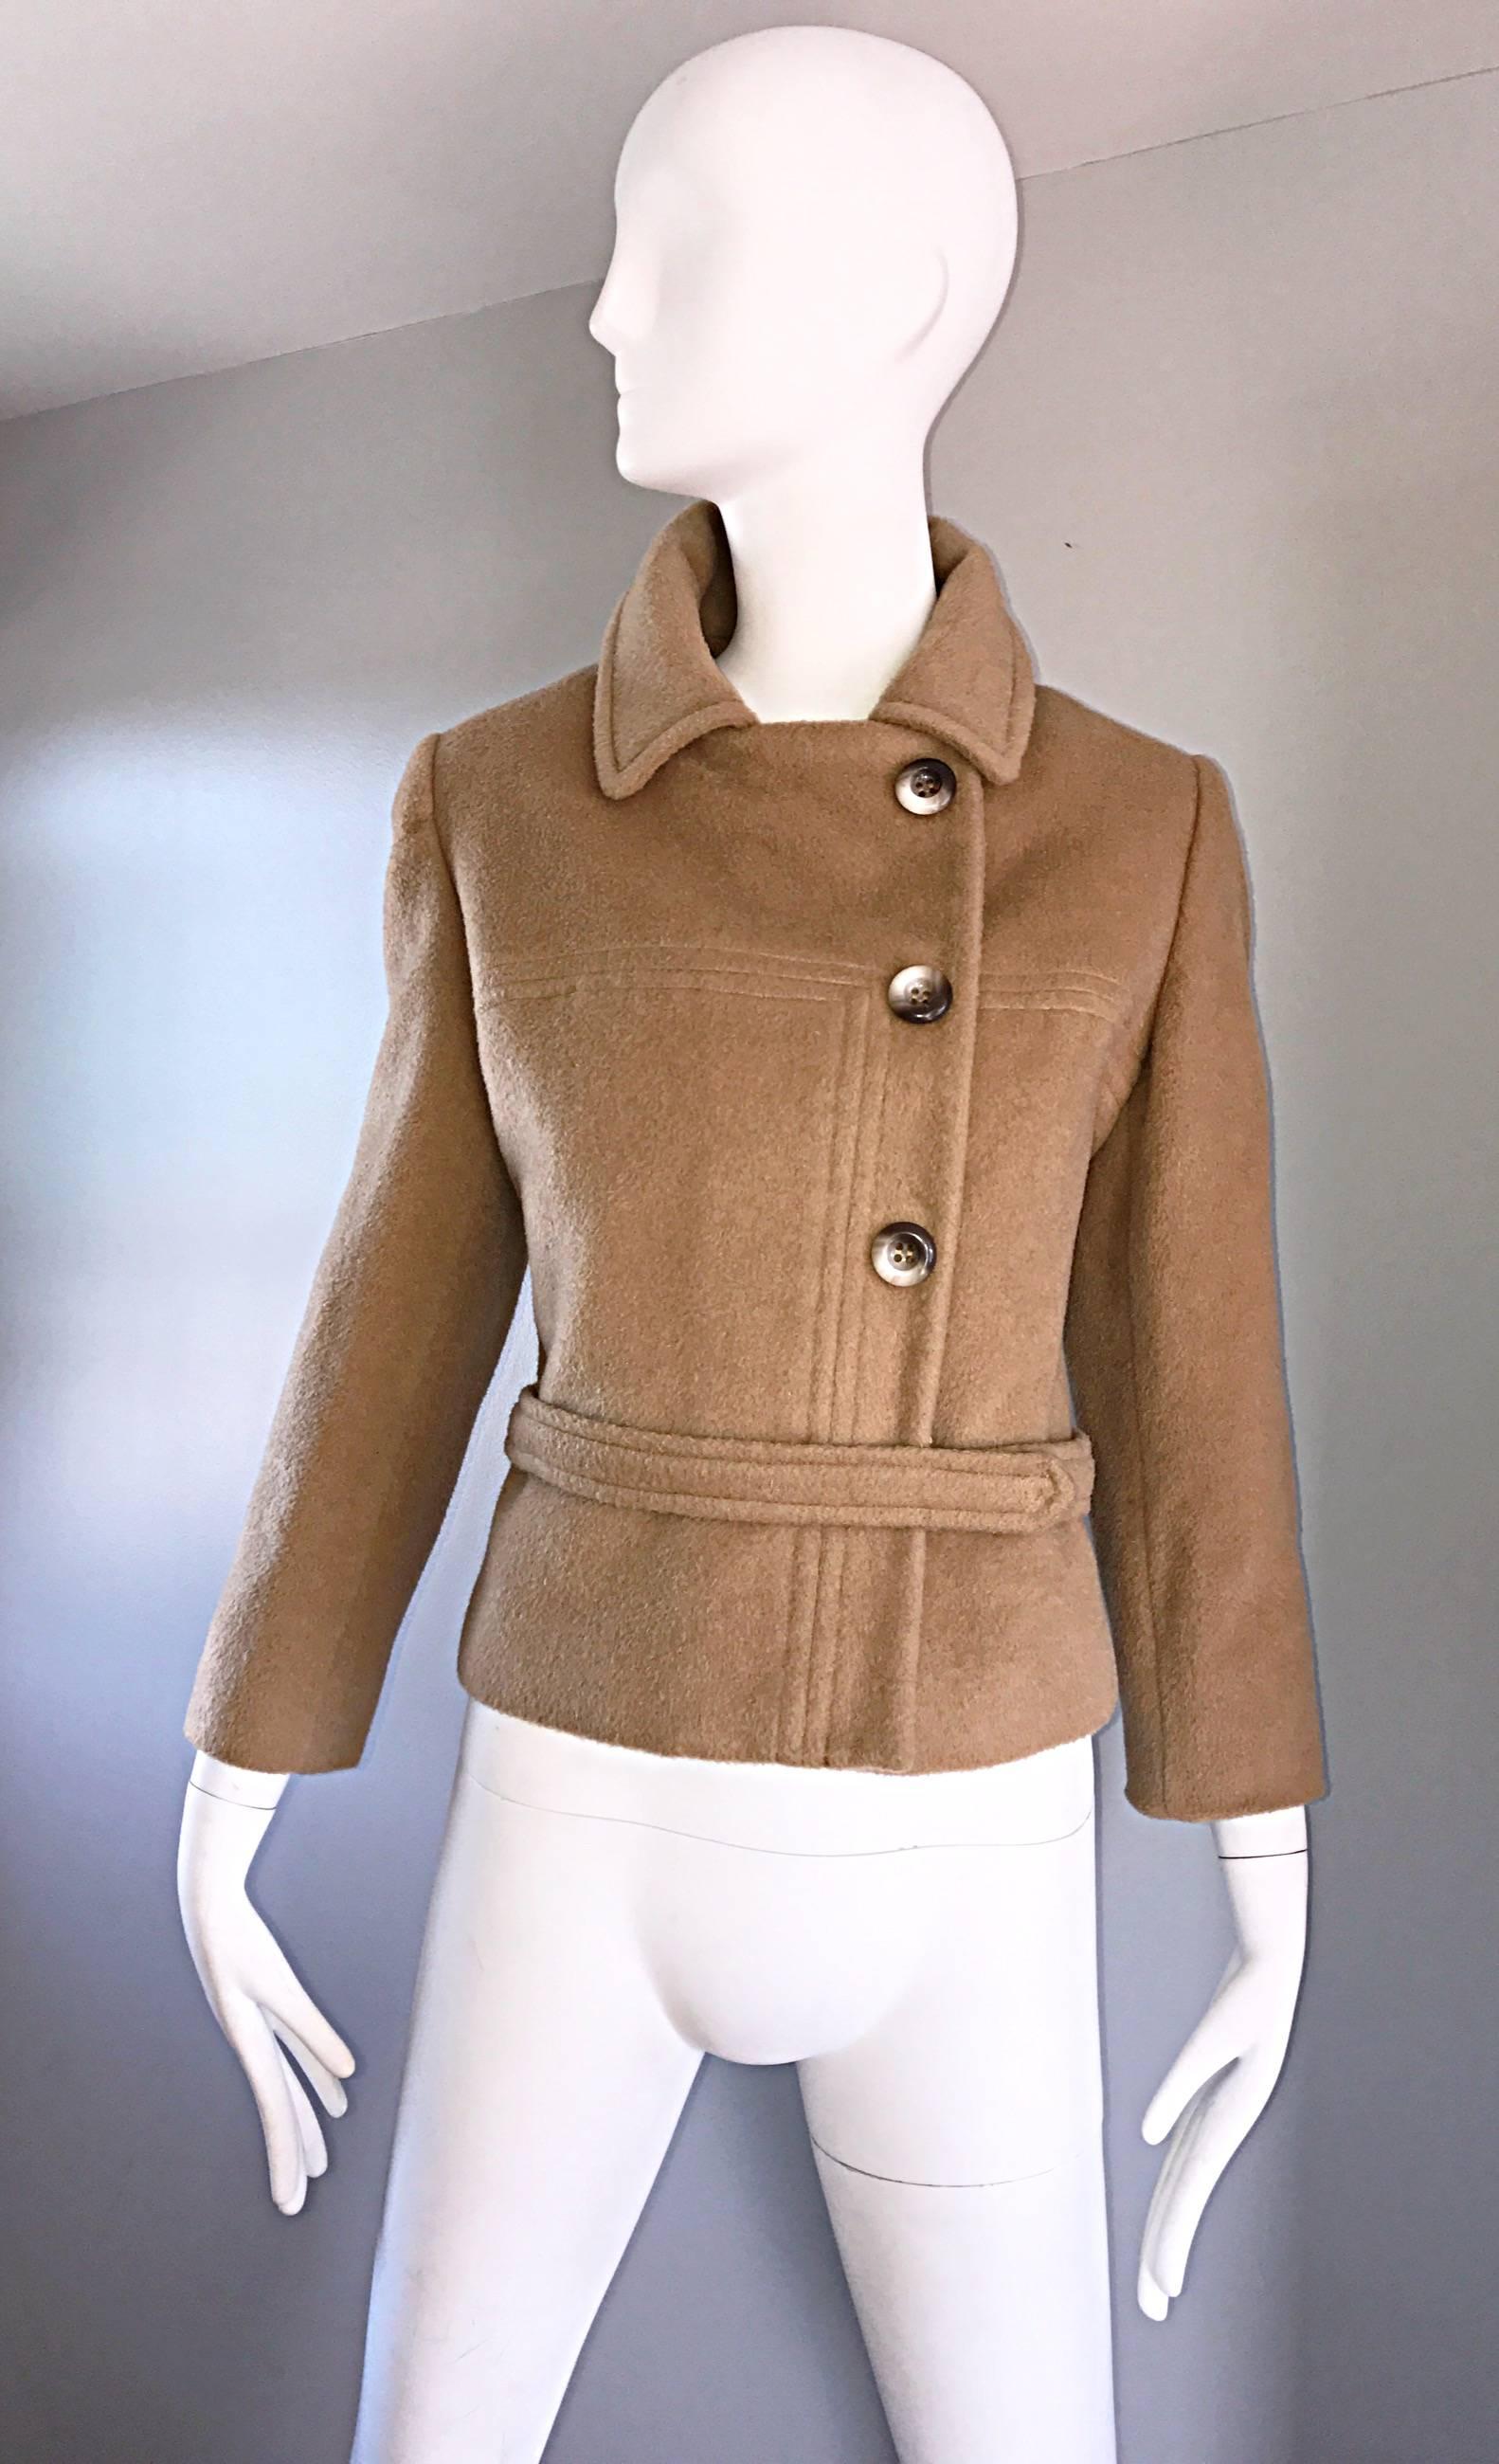 Chic and beautiful 1960s SAKS 5TH AVE perfect camel color cropped wool jacket! Sleek tailored fit, with interesting stitching detail on the front. Attached wrap belt with multiple hidden snaps. Mock horn buttons up the front, with hidden snaps to